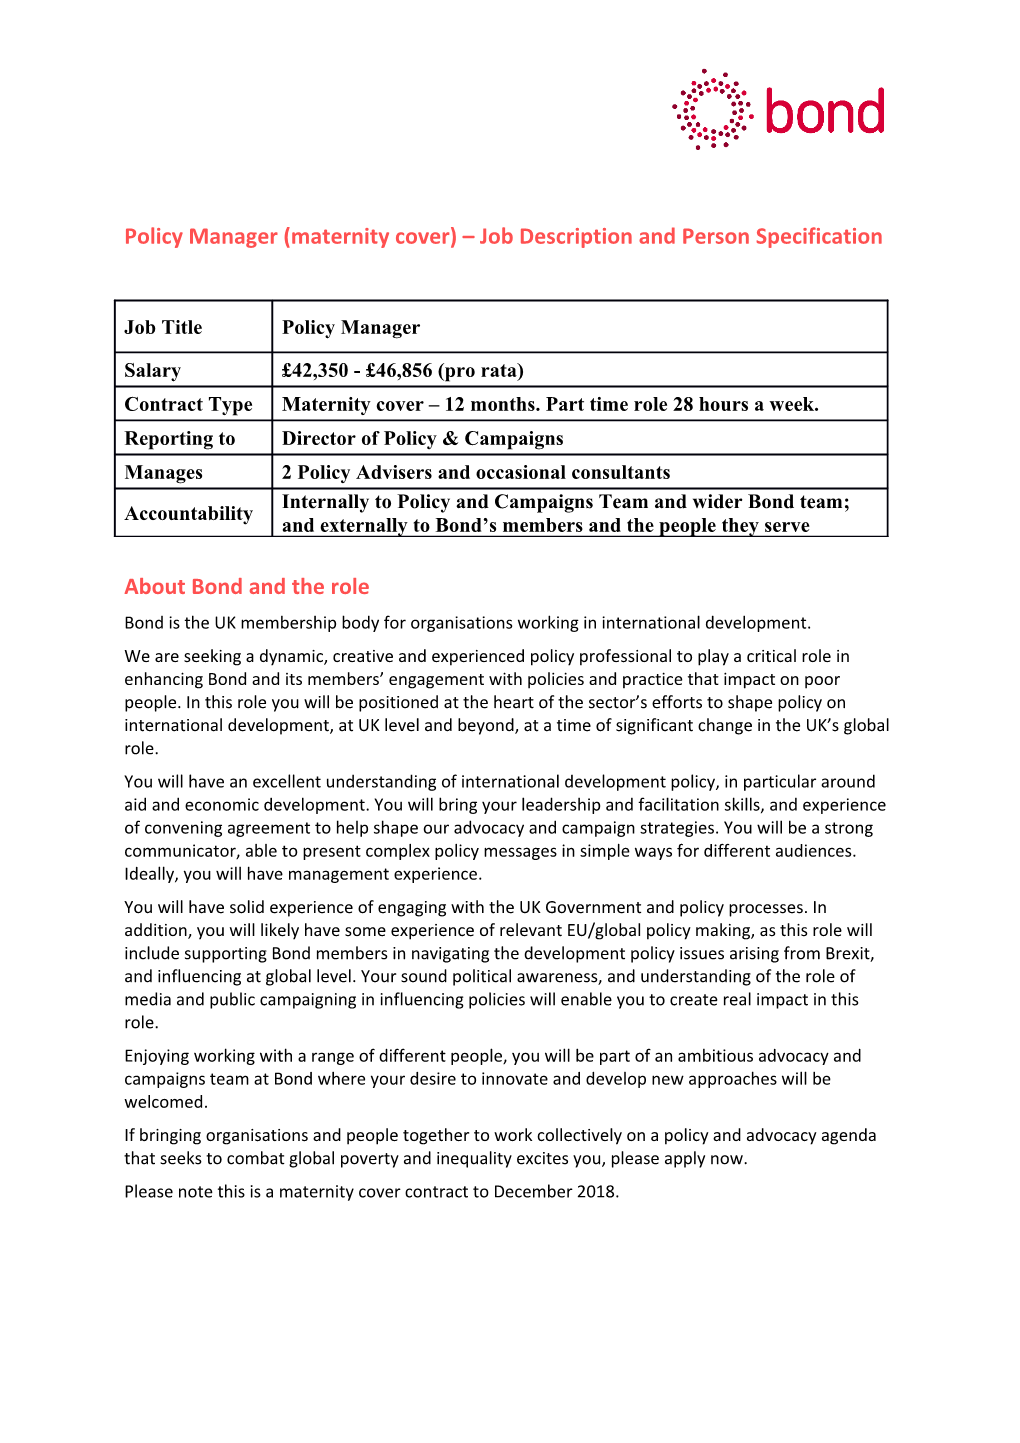 Policy Manager (Maternity Cover) Job Description and Person Specification